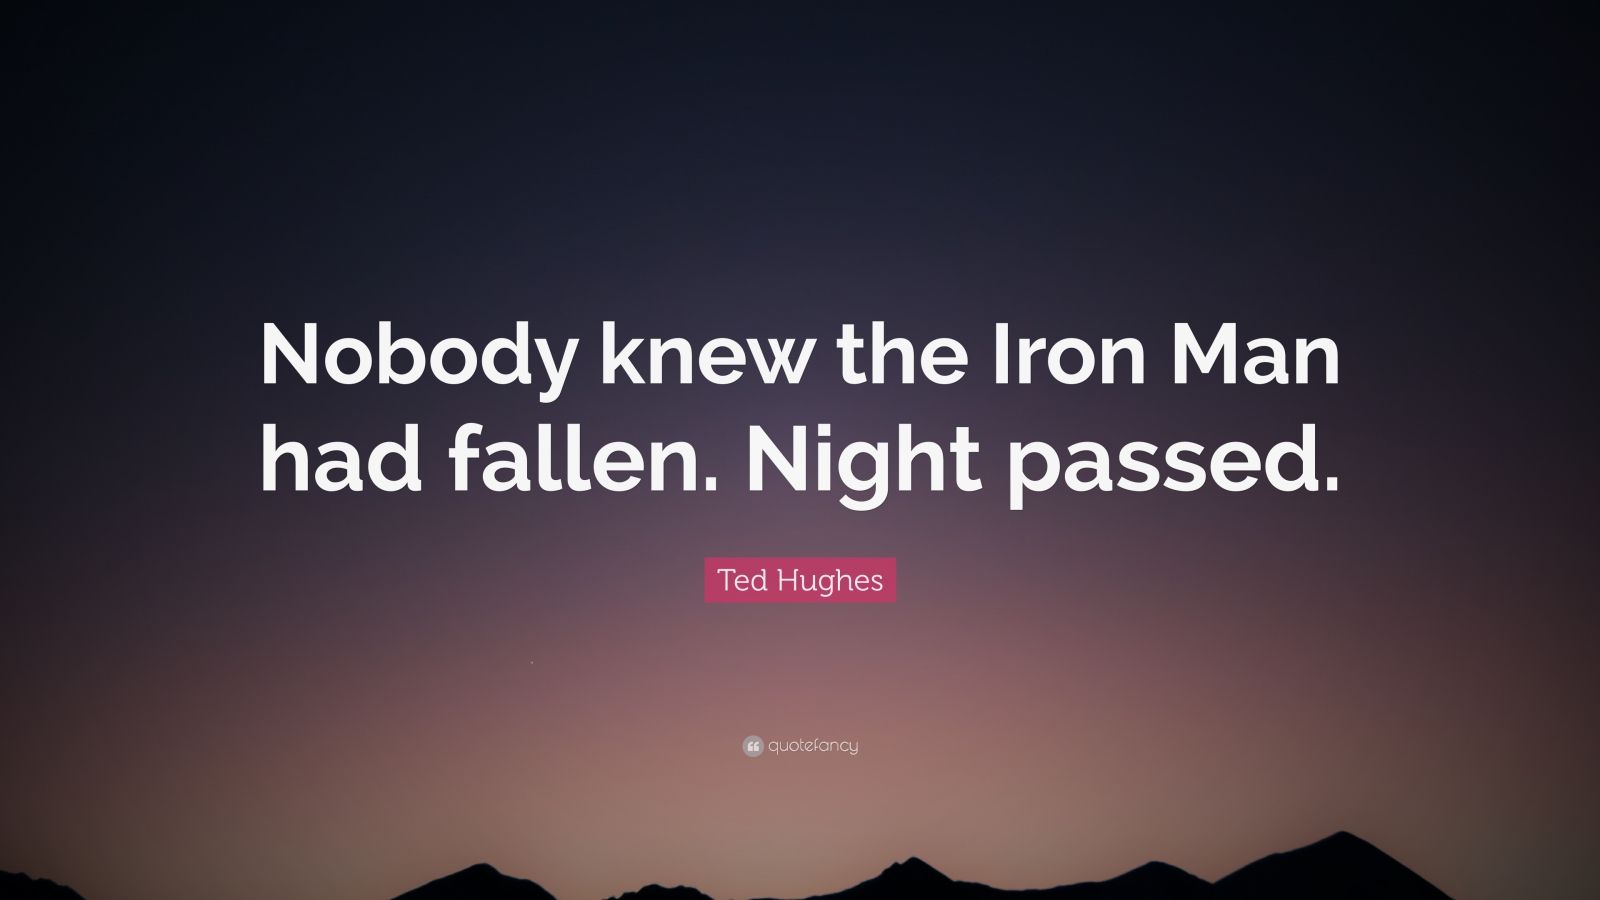 Ted Hughes Quote: "Nobody knew the Iron Man had fallen ...